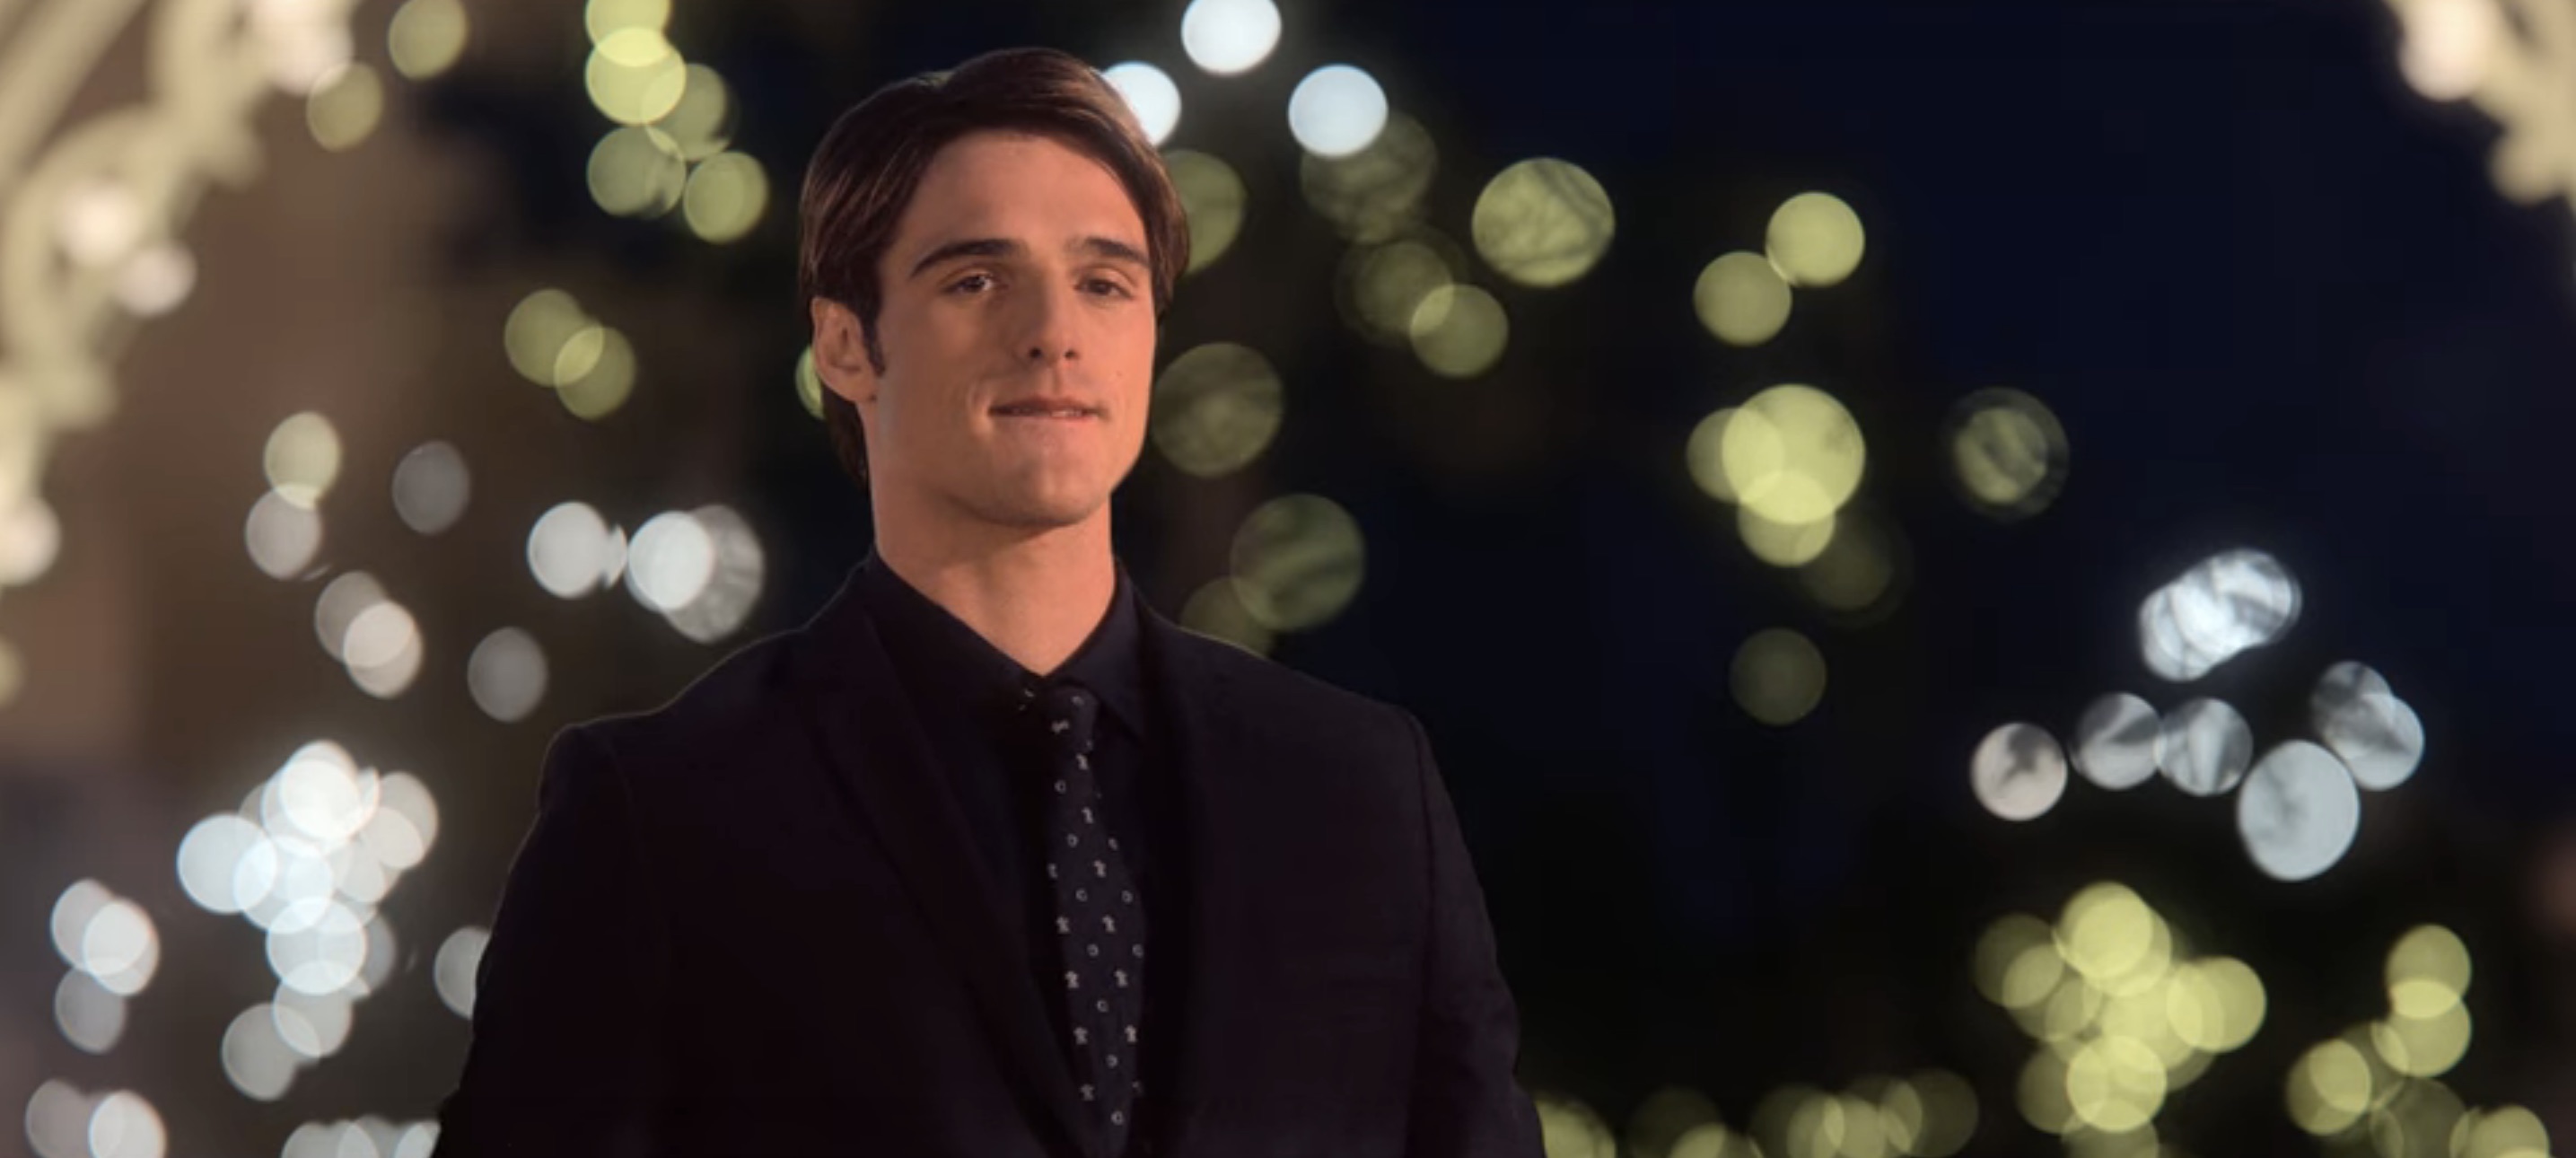 The Kissing Booth 3 Cast - Jacob Elordi as Noah